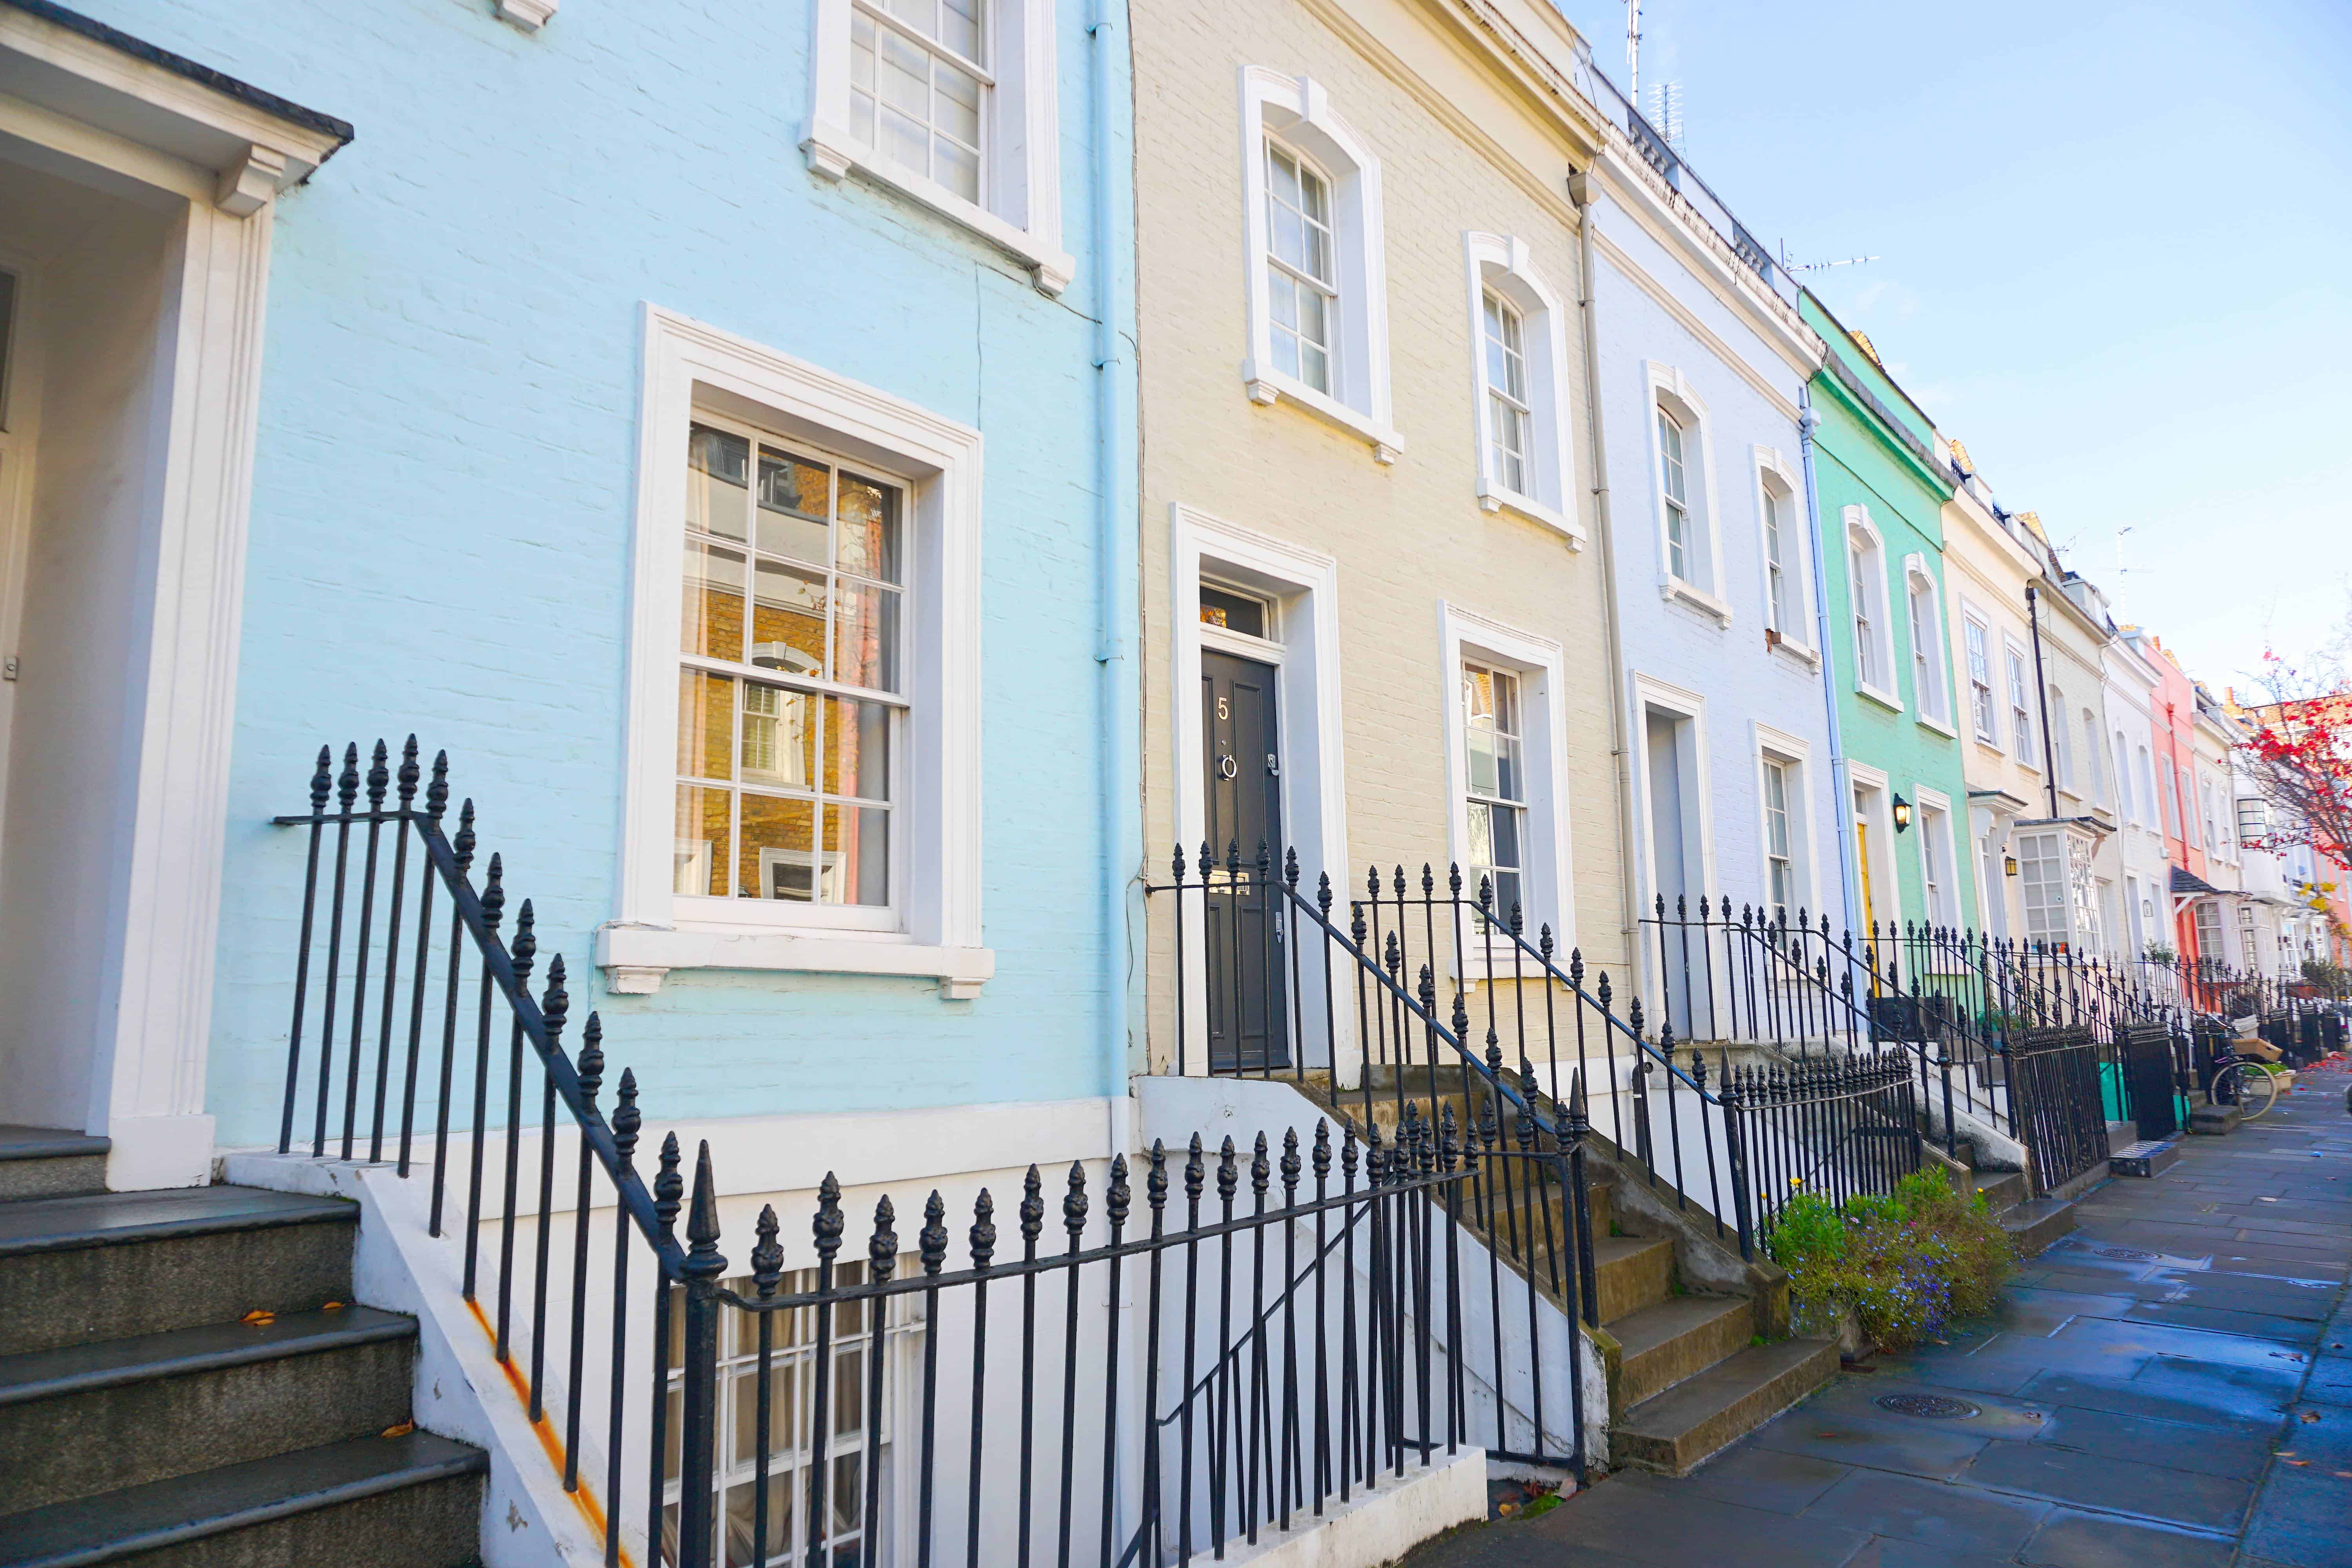 Bywater Street is one of the cutest colorful streets in London! | things to do in london 